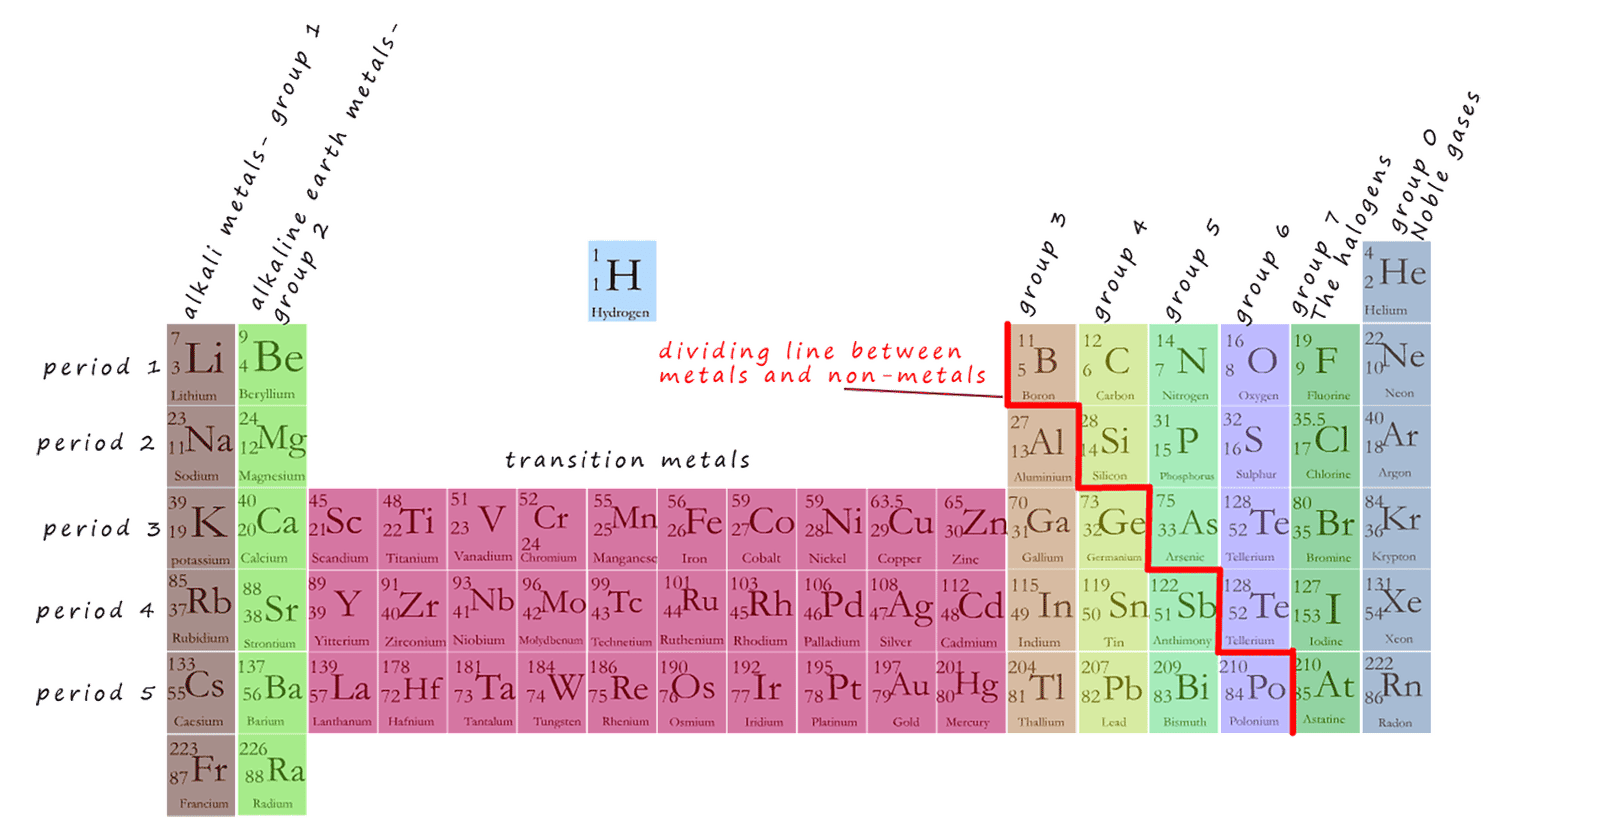 The metals are found in the middle block and the left hand side of the periodic table